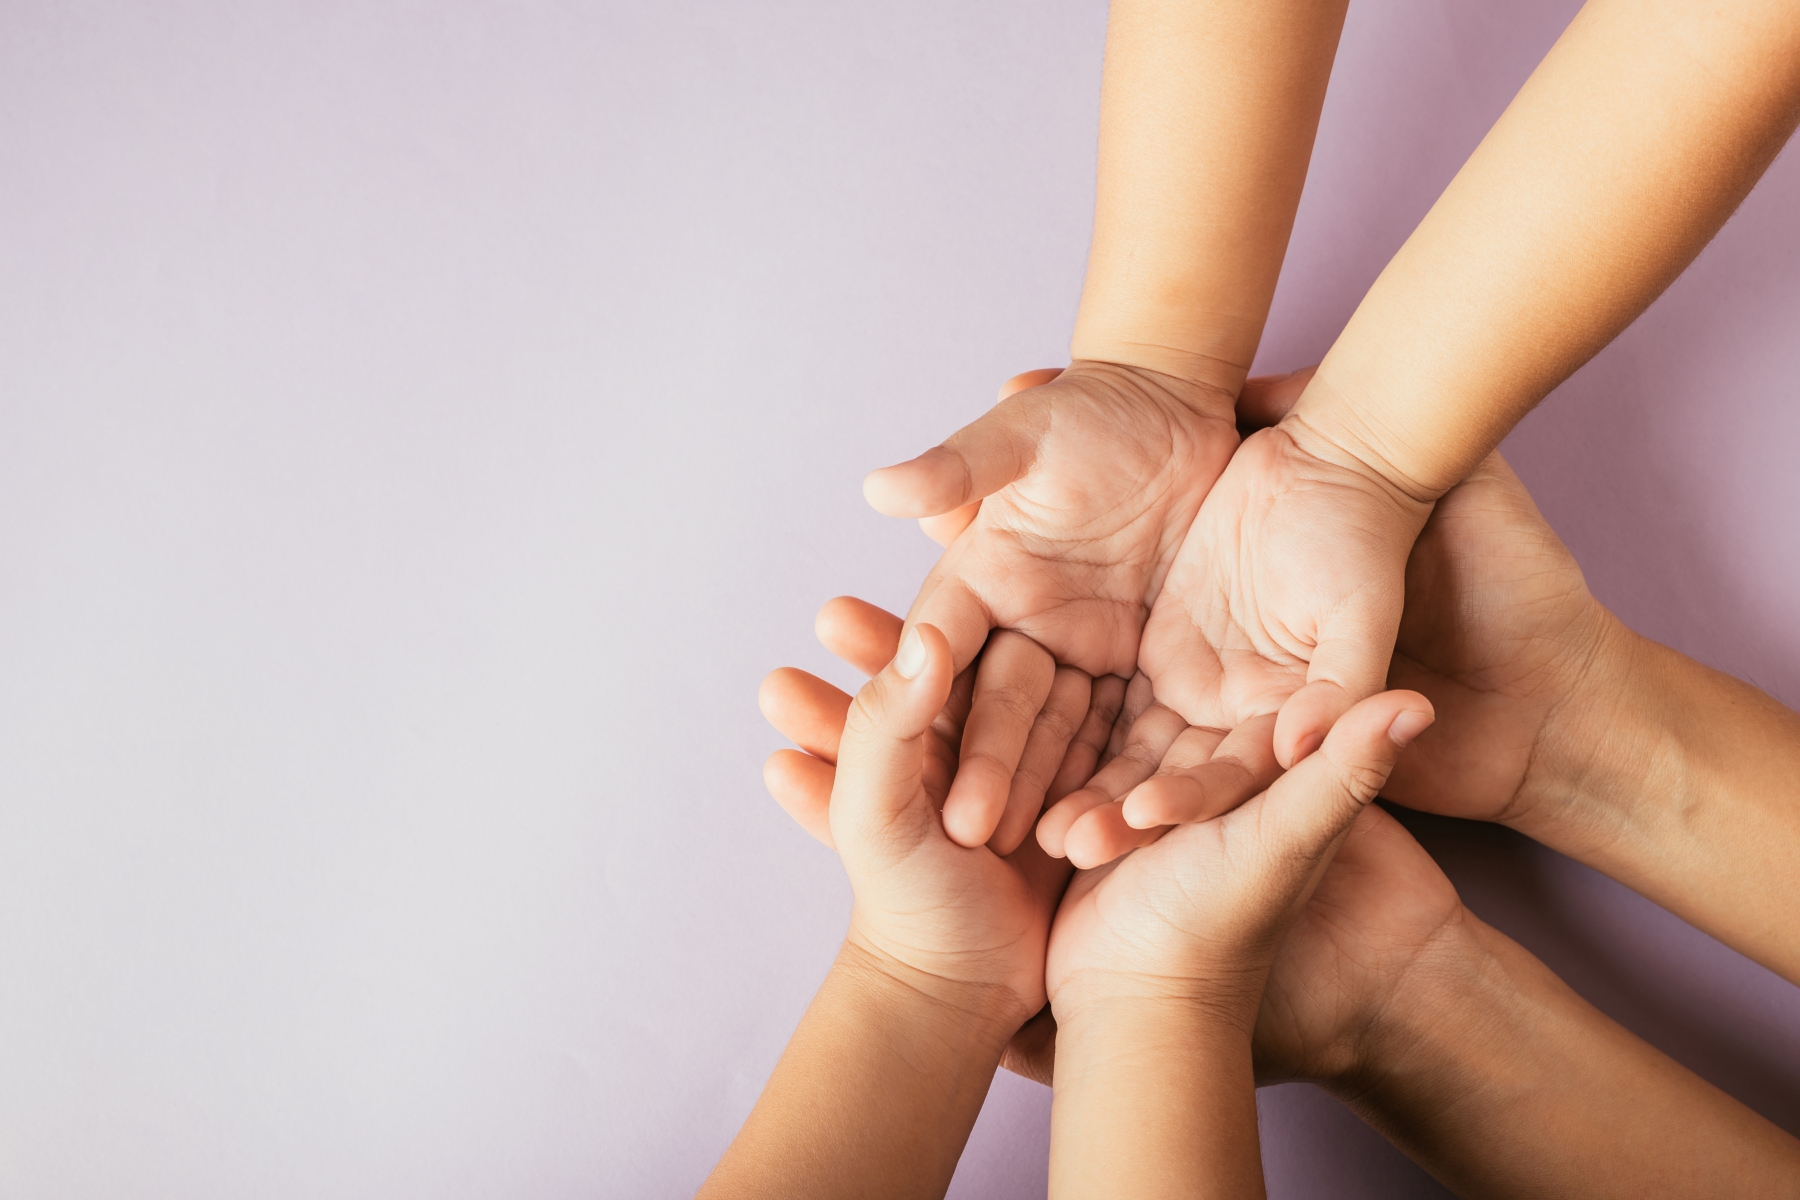 Outstretched adult hands support pairs of children’s hands in their palms